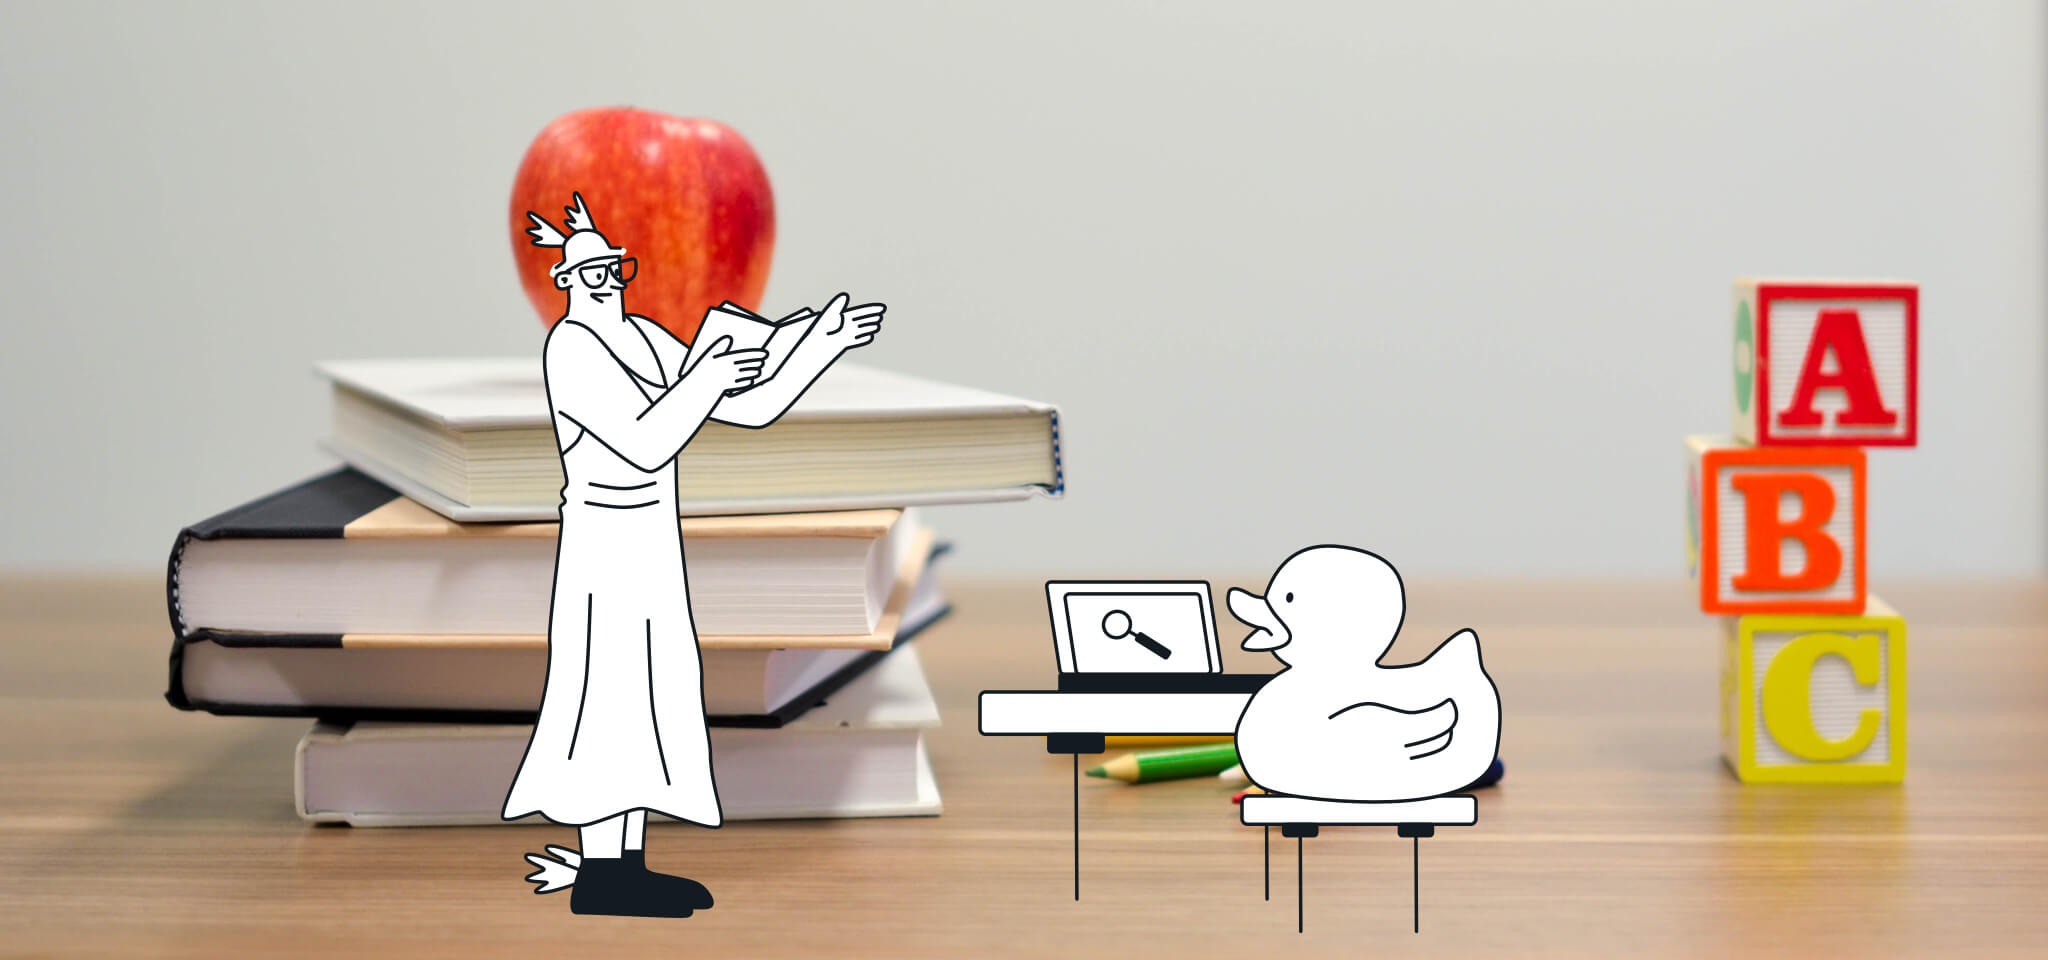 god with apple, blocks and duck